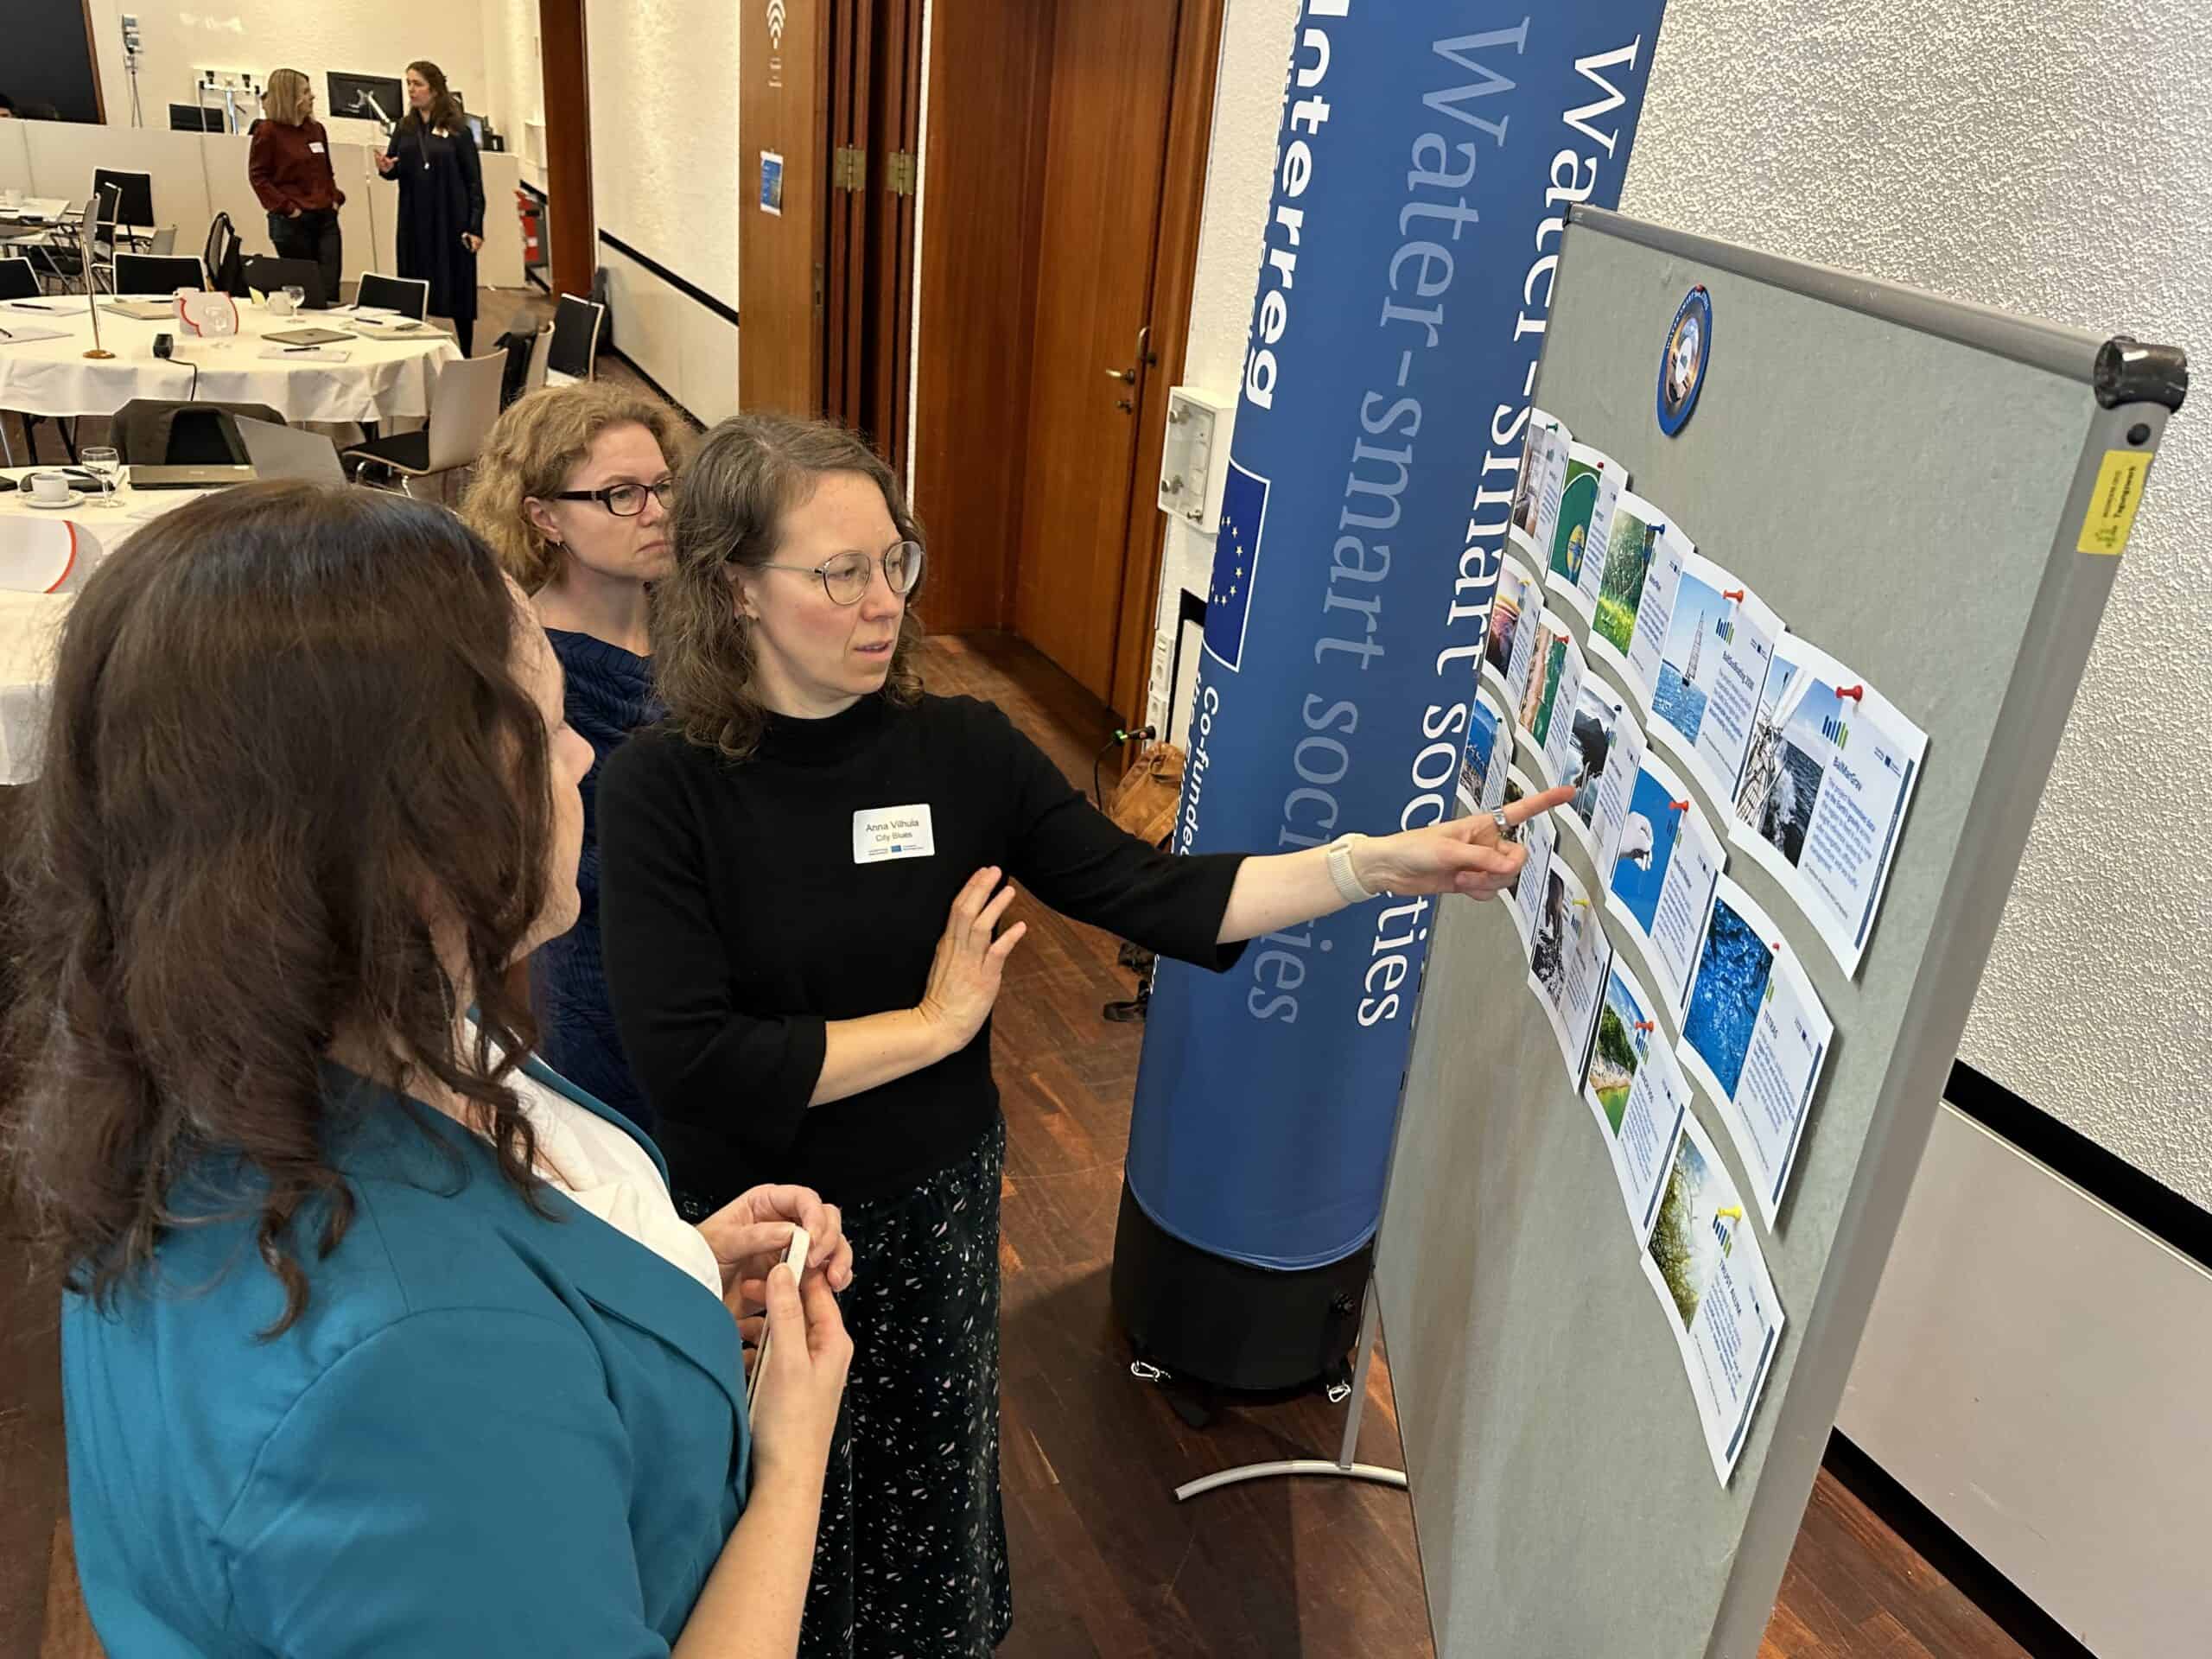 three persons interact by looking at the pinboard that contains project examples